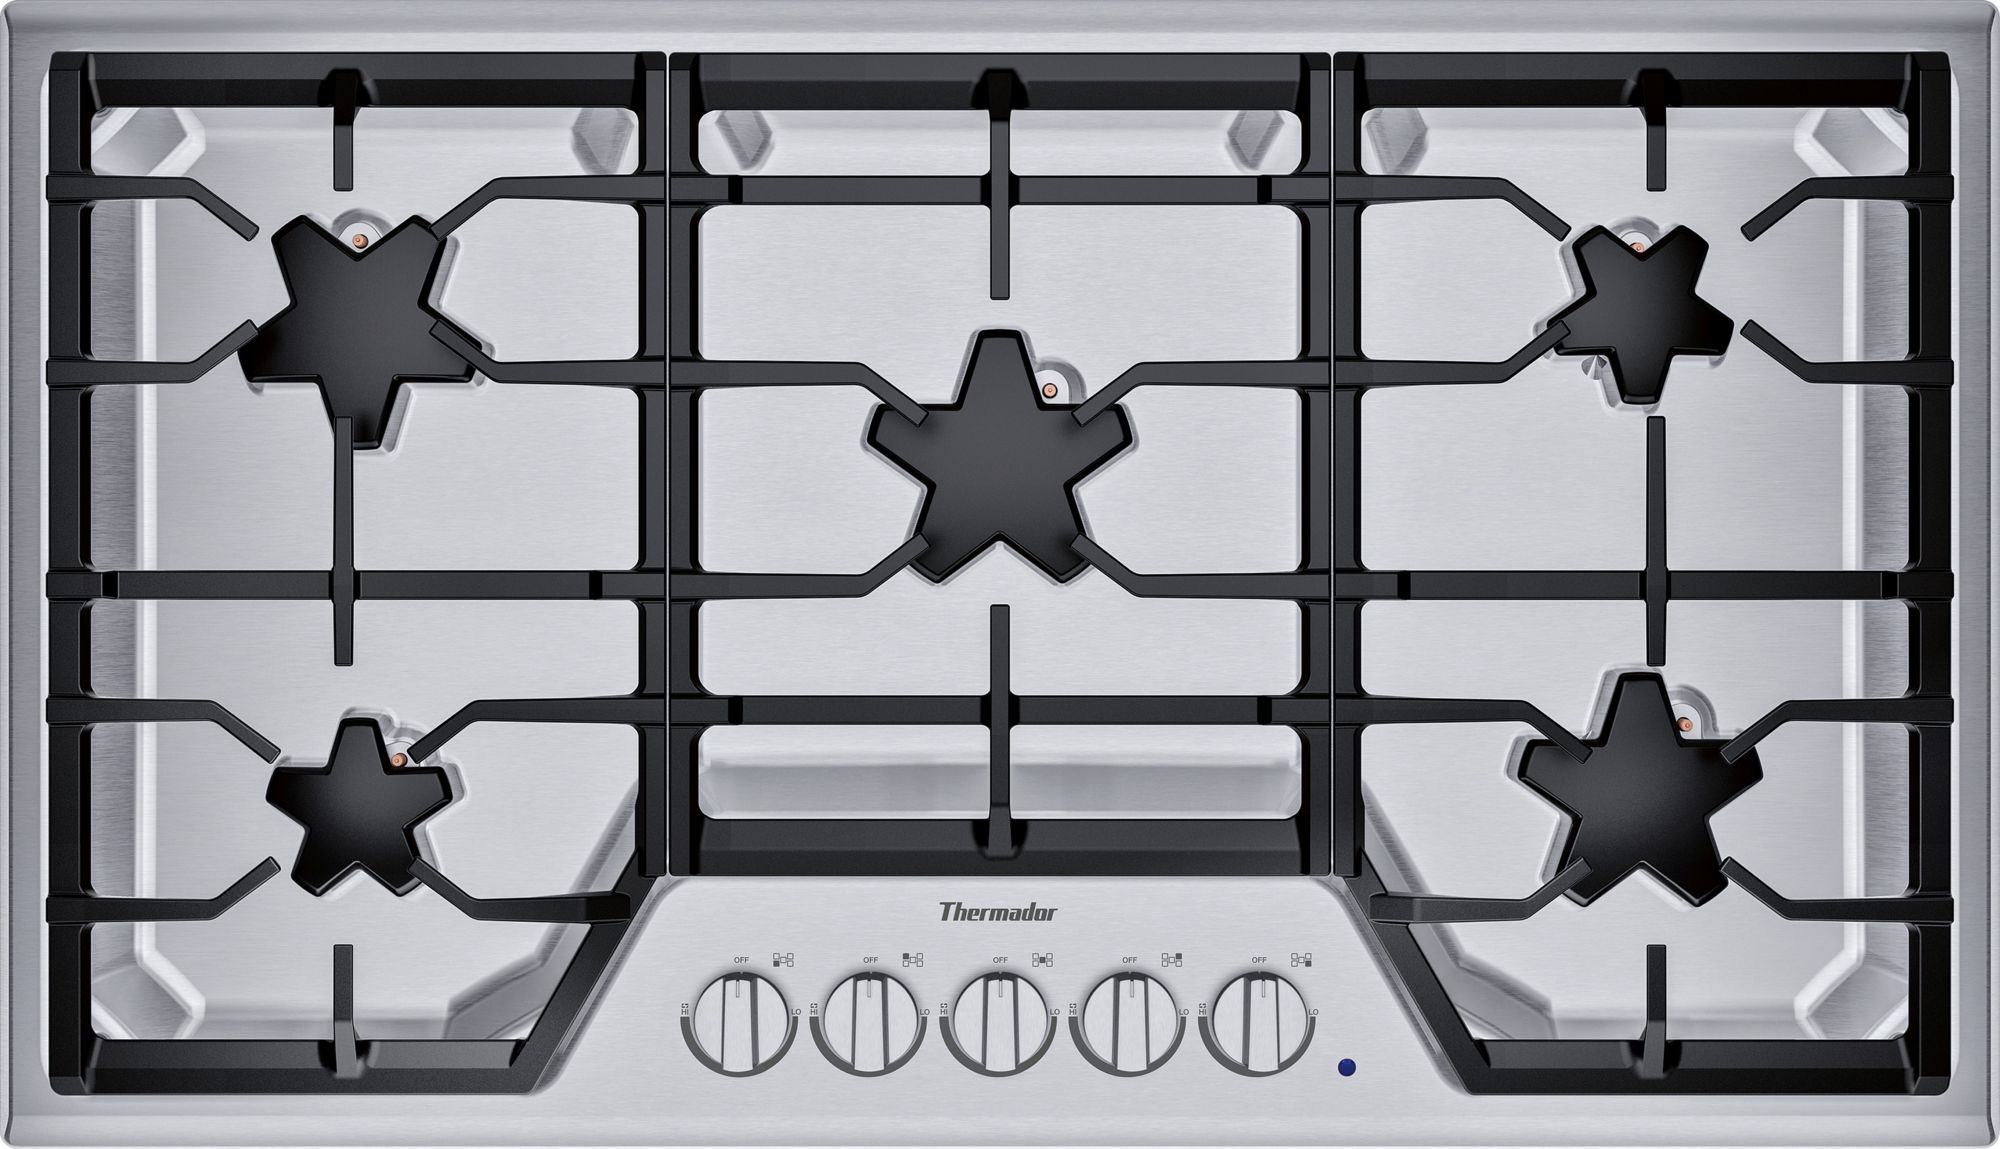 Thermador Masterpiece 36 Natural Gas Drop-In Cooktop SGS365TS